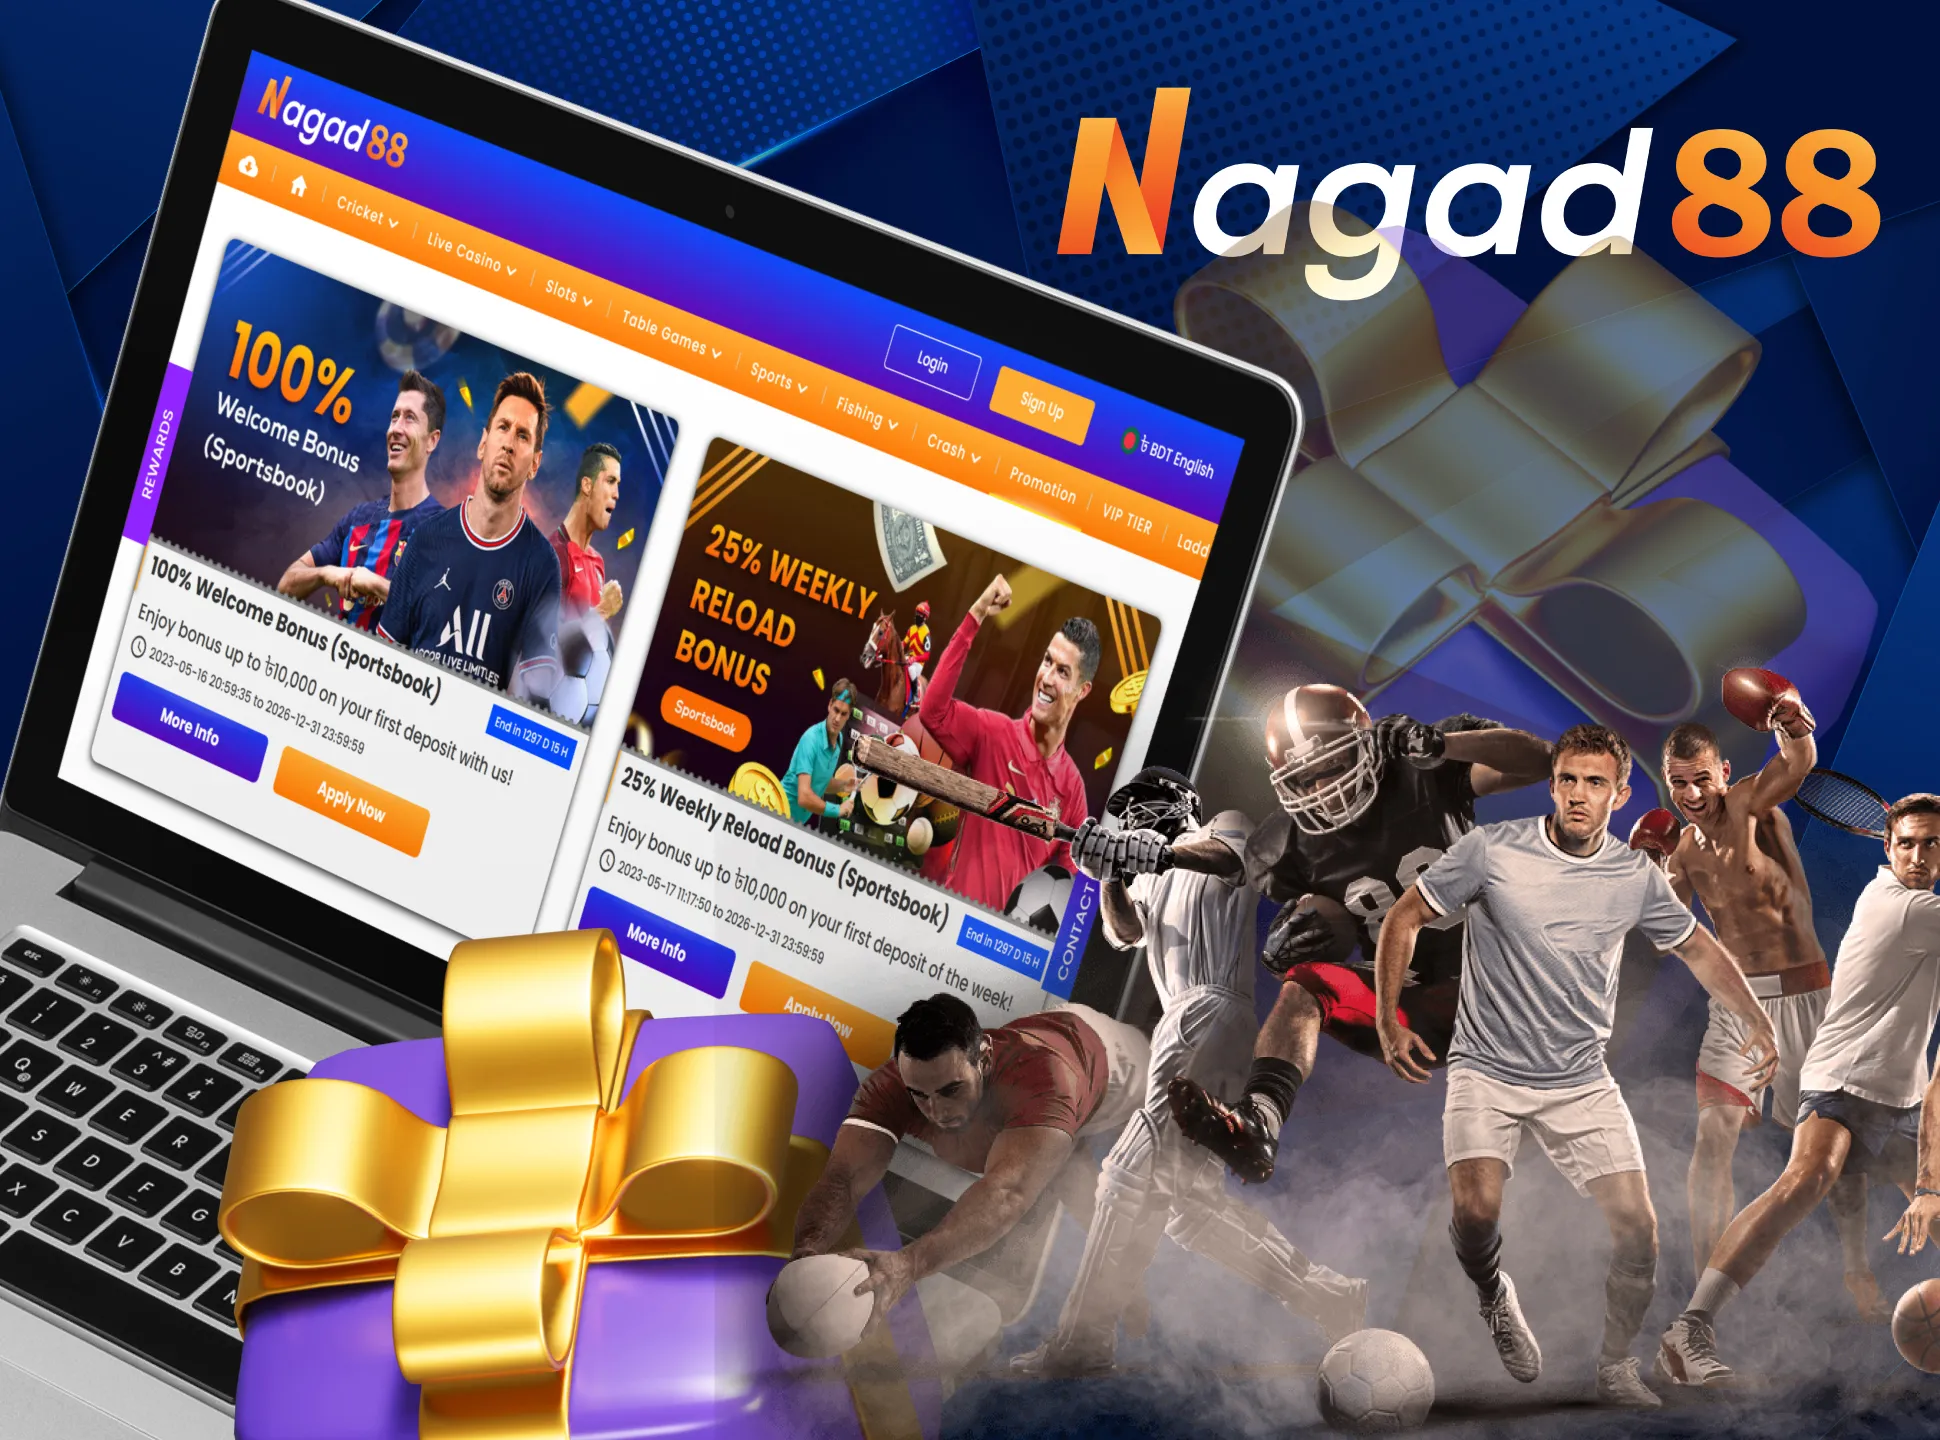 Nagad88 offers a great bonus on sport betting for new players.